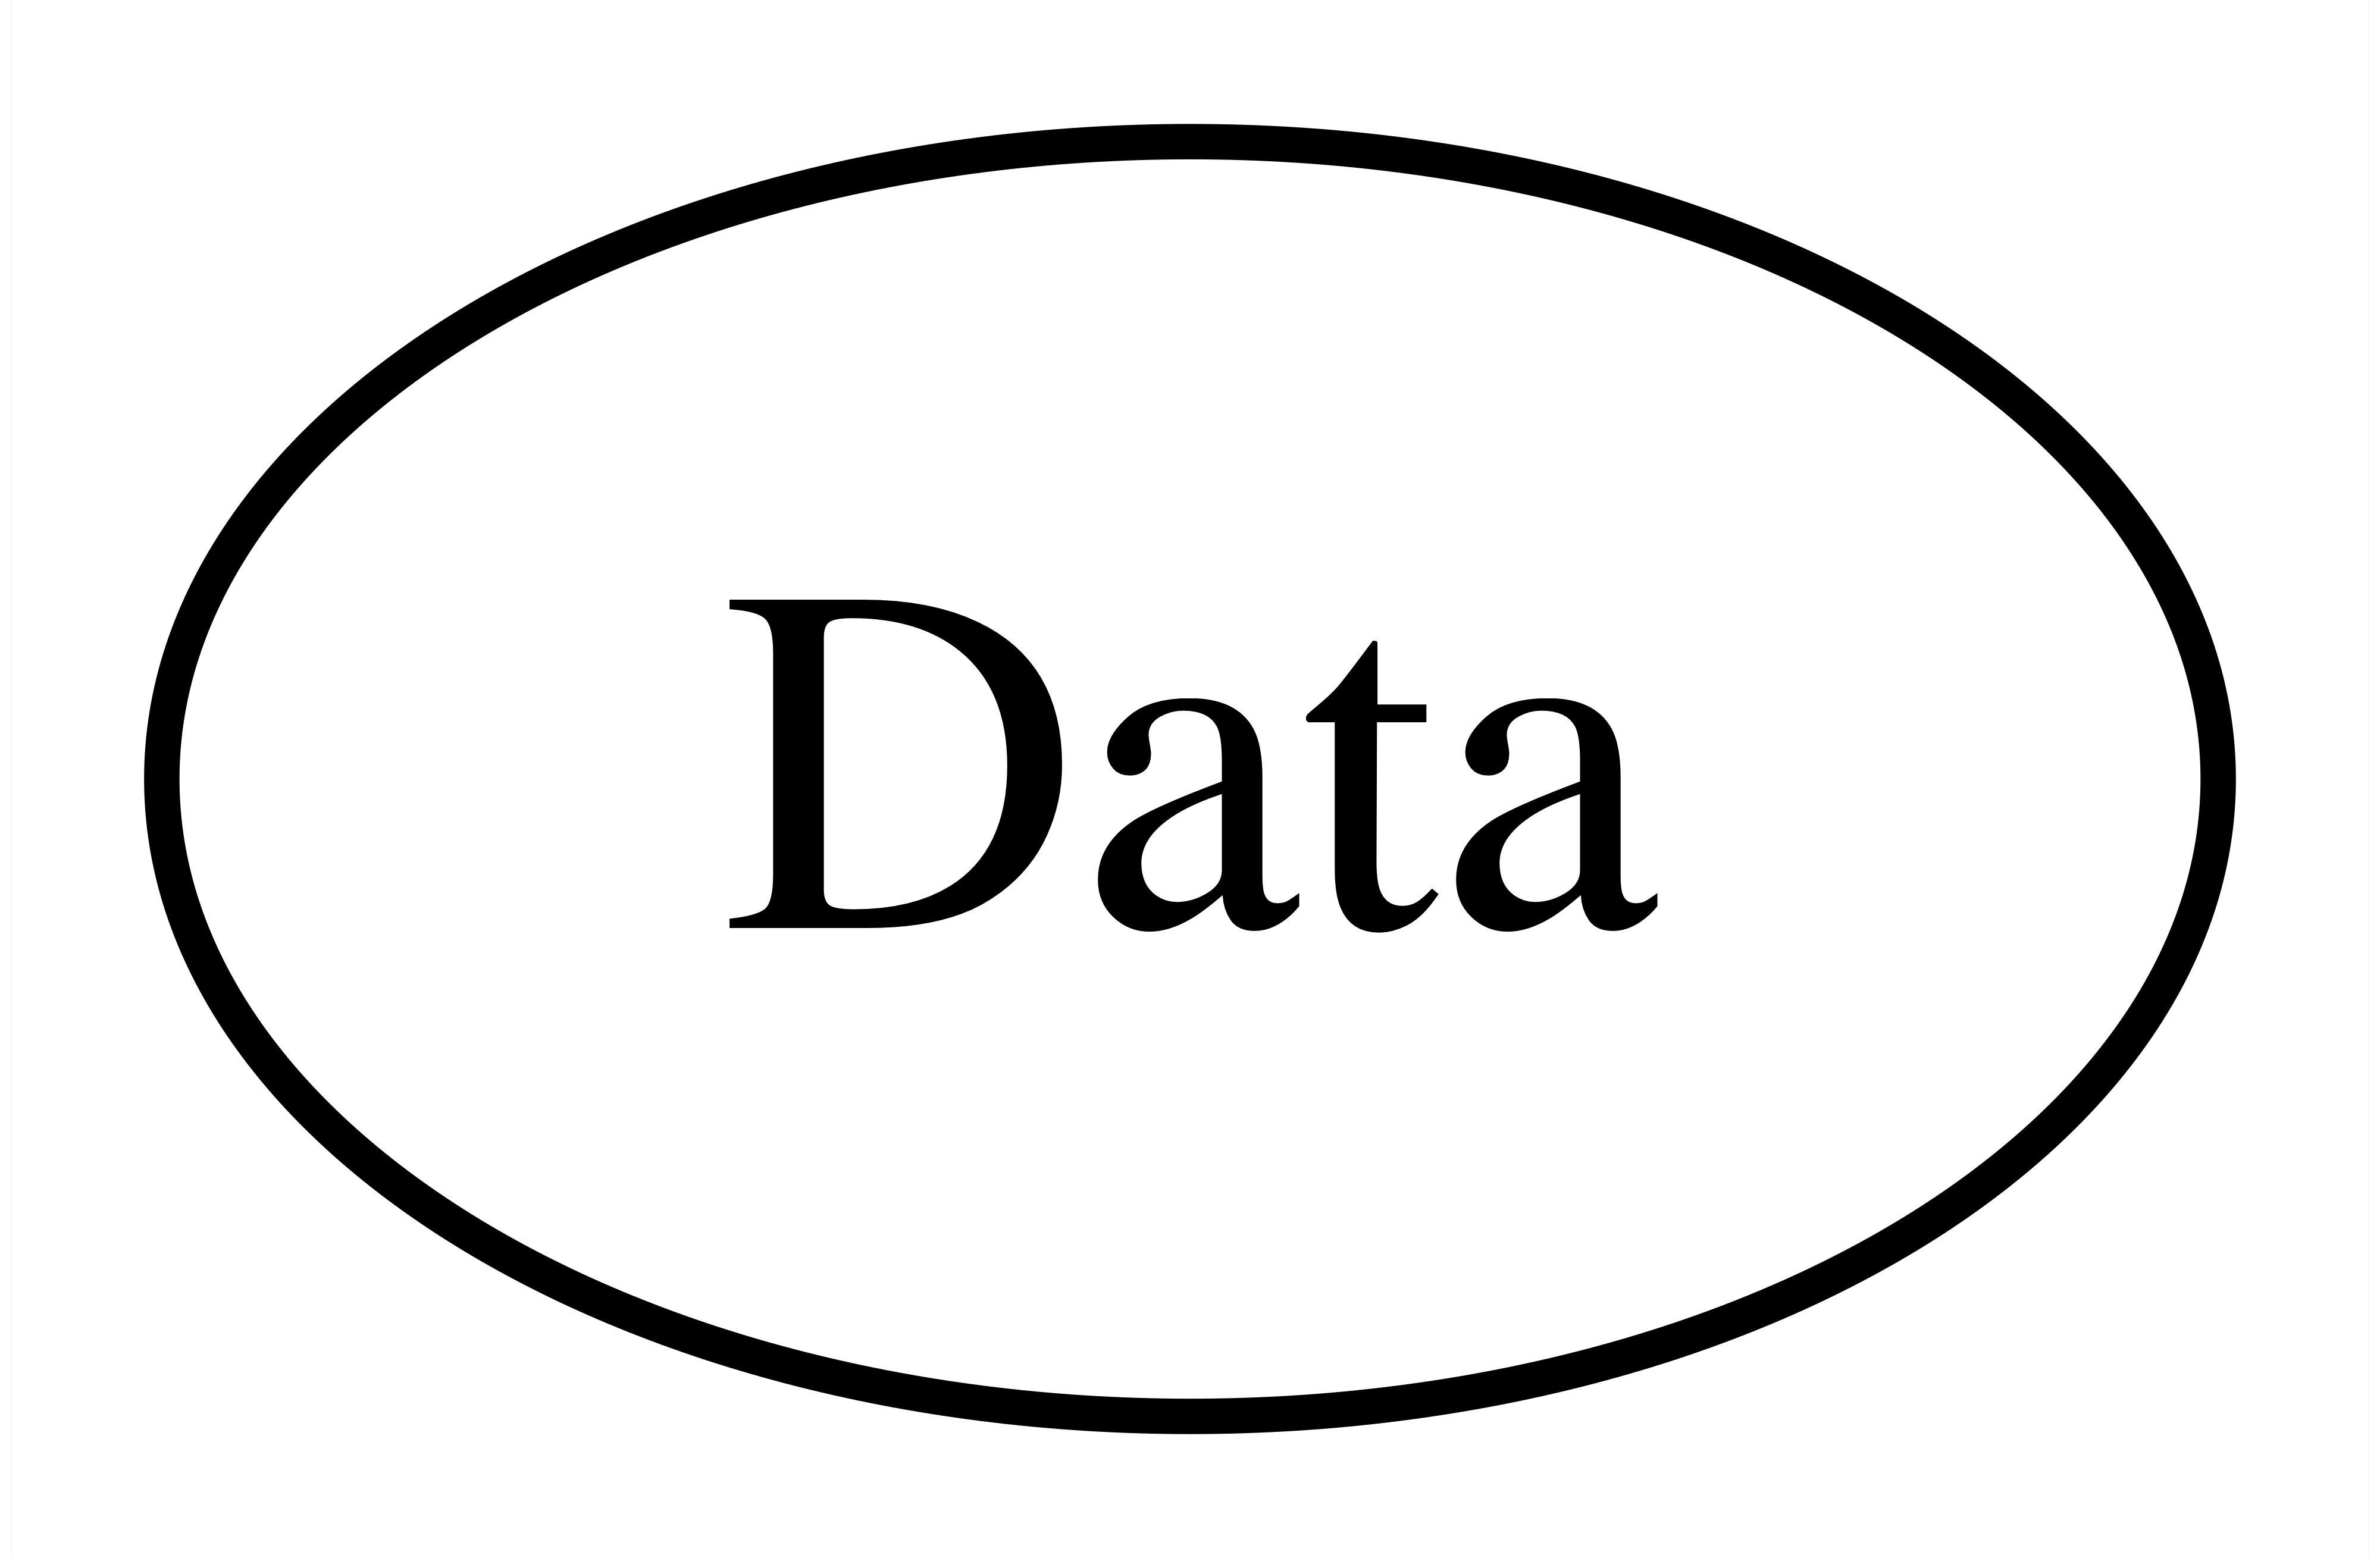 An ellipse labeled as data